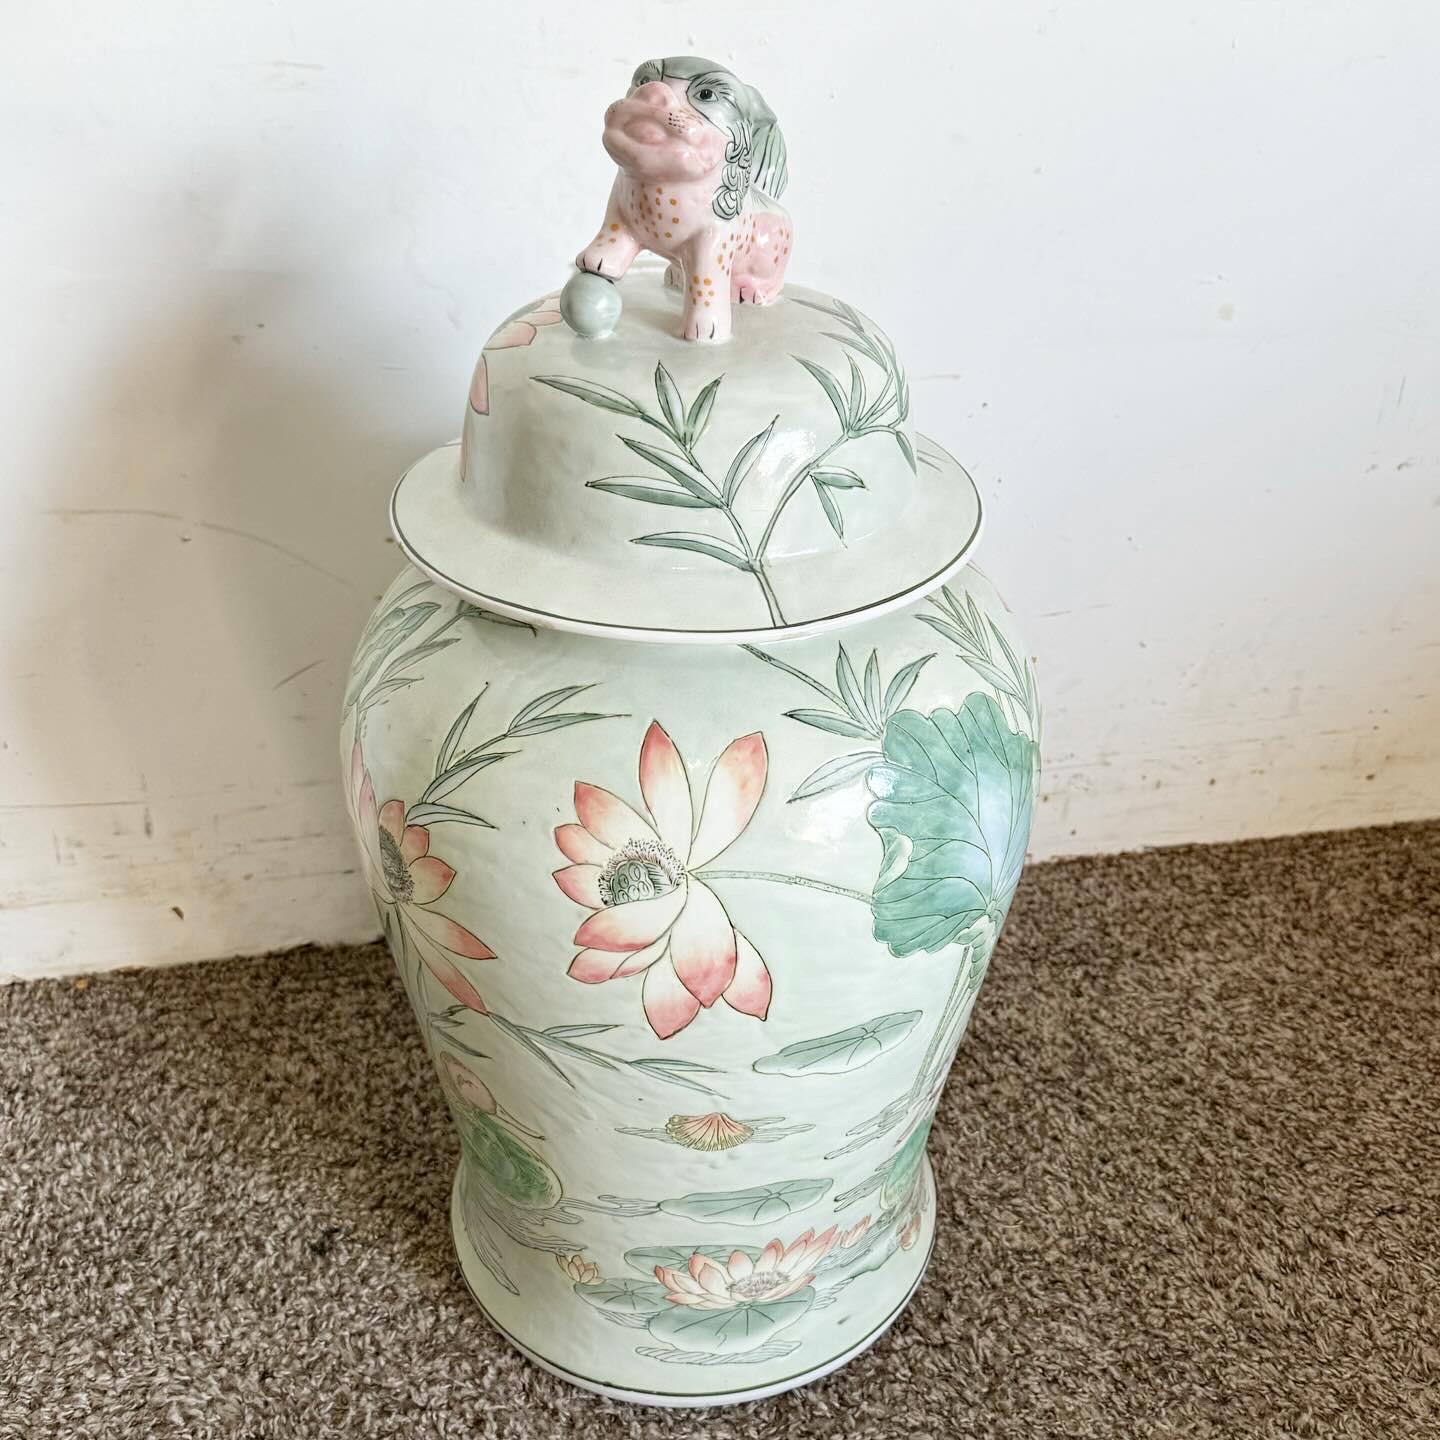 The Chinese Large Ginger Jar/Vase with Foo Dog Lid is a remarkable display of Chinese artistry. Featuring a sculpted foo dog on the lid, it symbolizes protection and adds asian charm. Its large size makes it a statement piece, perfect for any room.